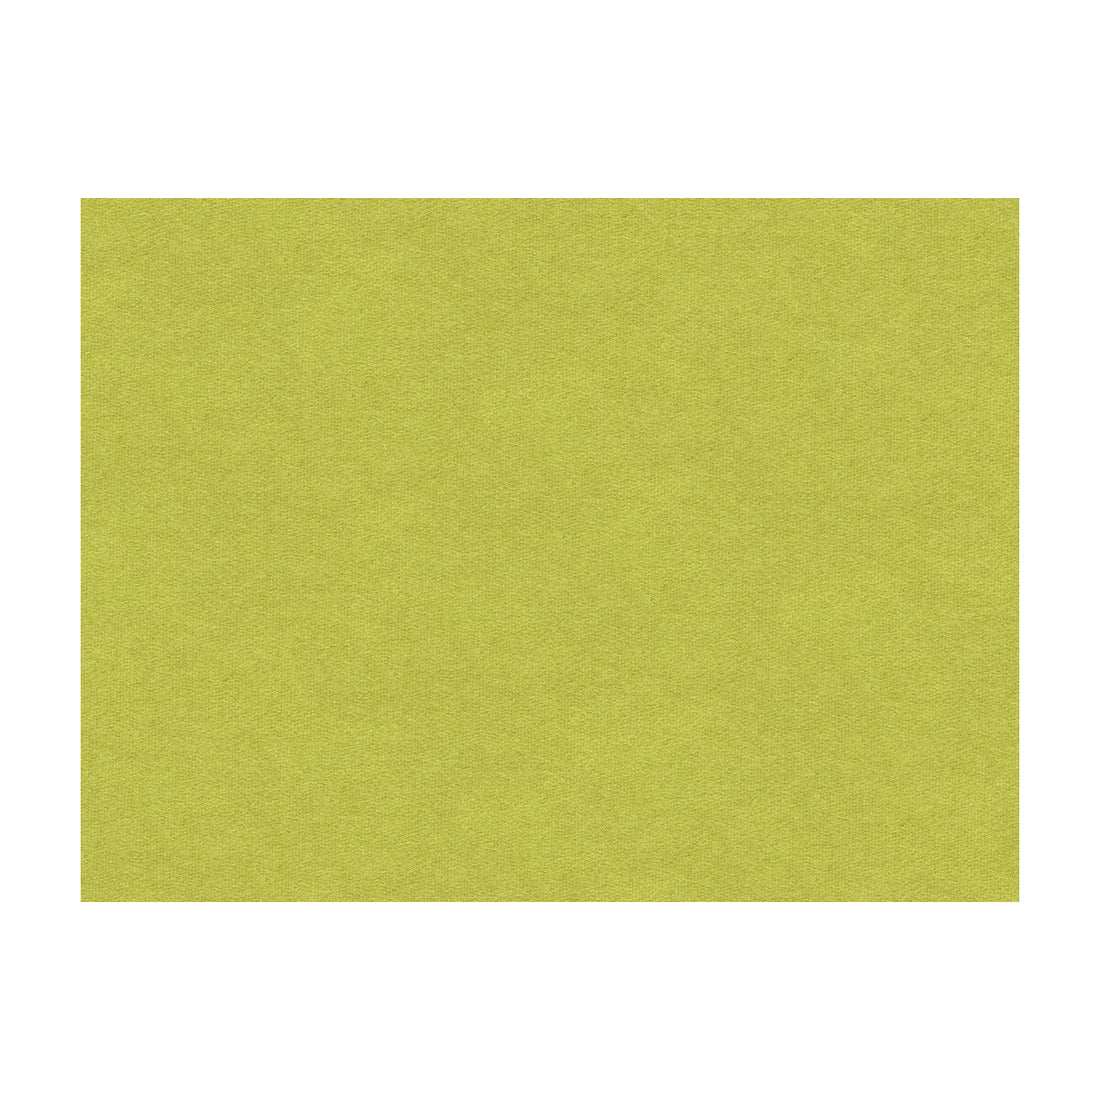 Chevalier Wool fabric in peridot color - pattern 8013149.303.0 - by Brunschwig &amp; Fils